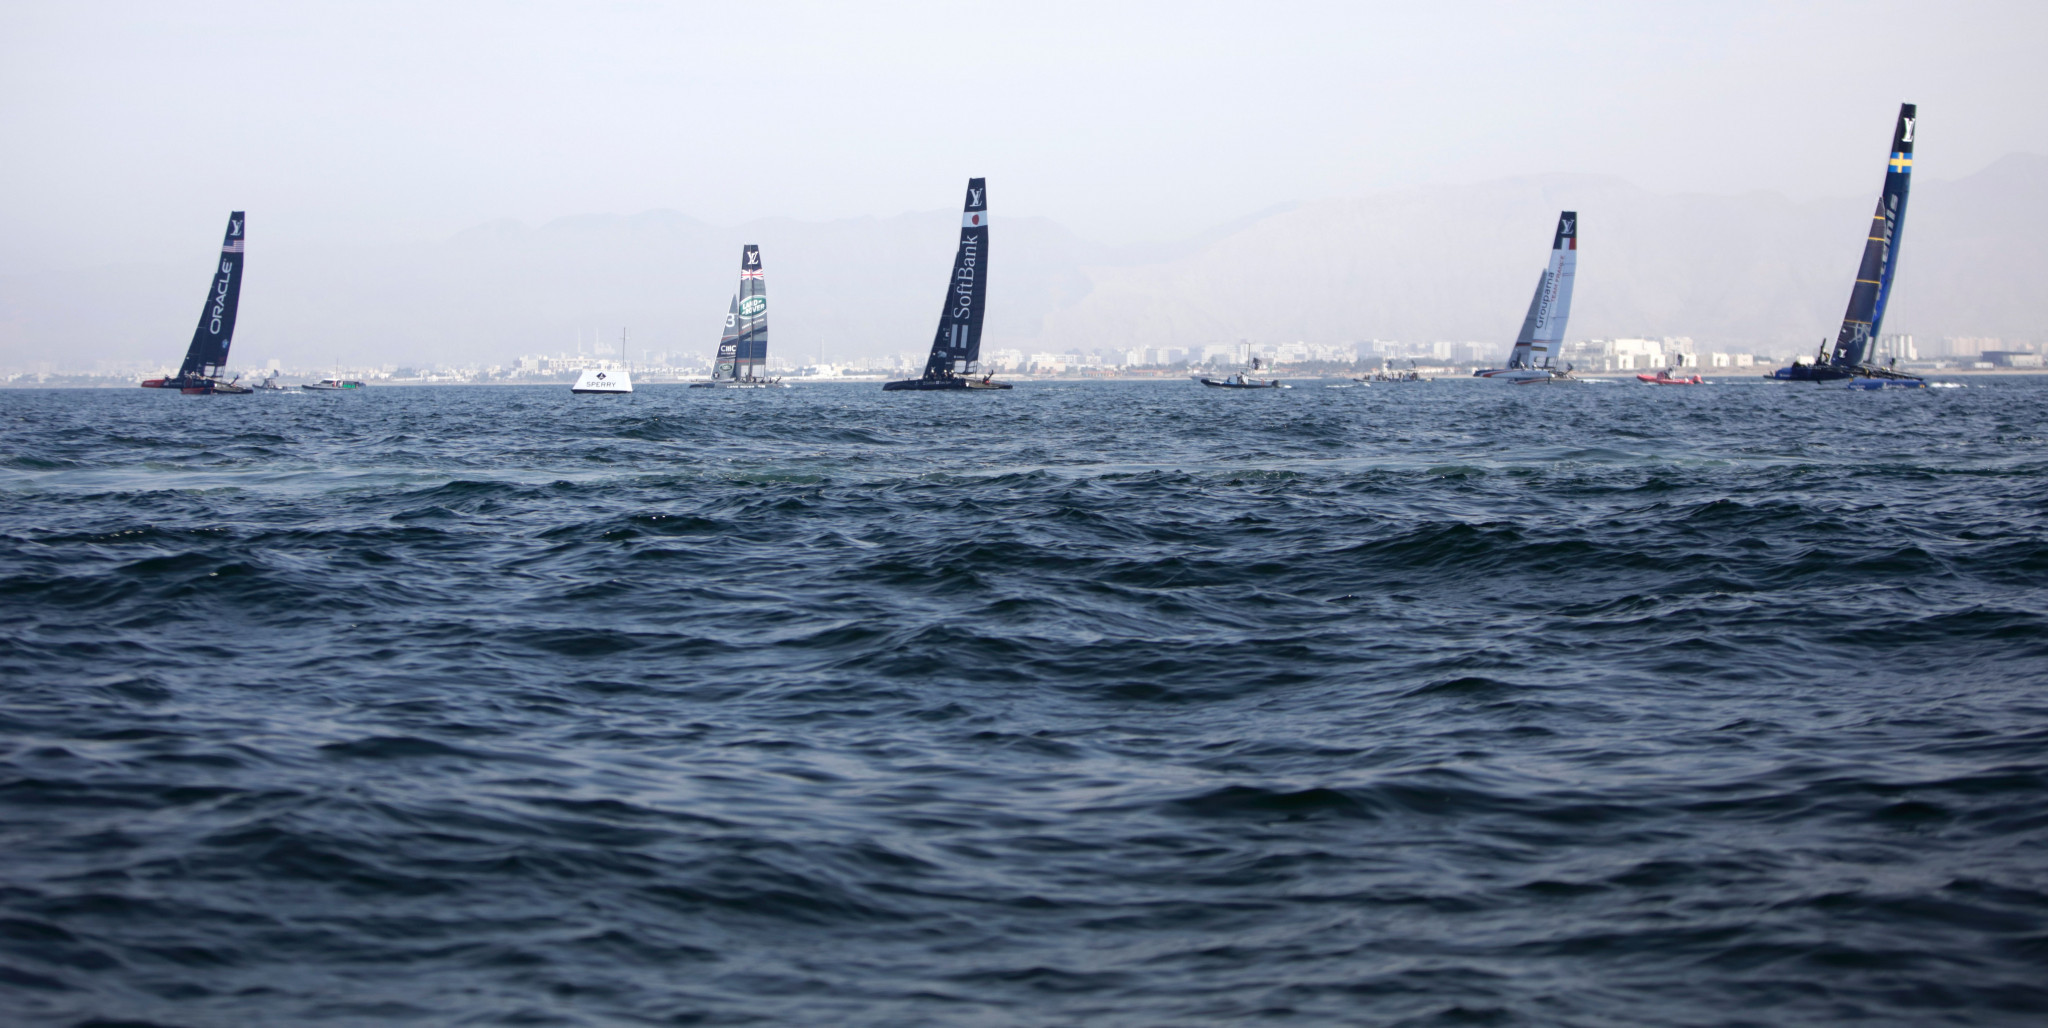 World Sailing announces finalists for 11th Hour Racing Sustainability Award